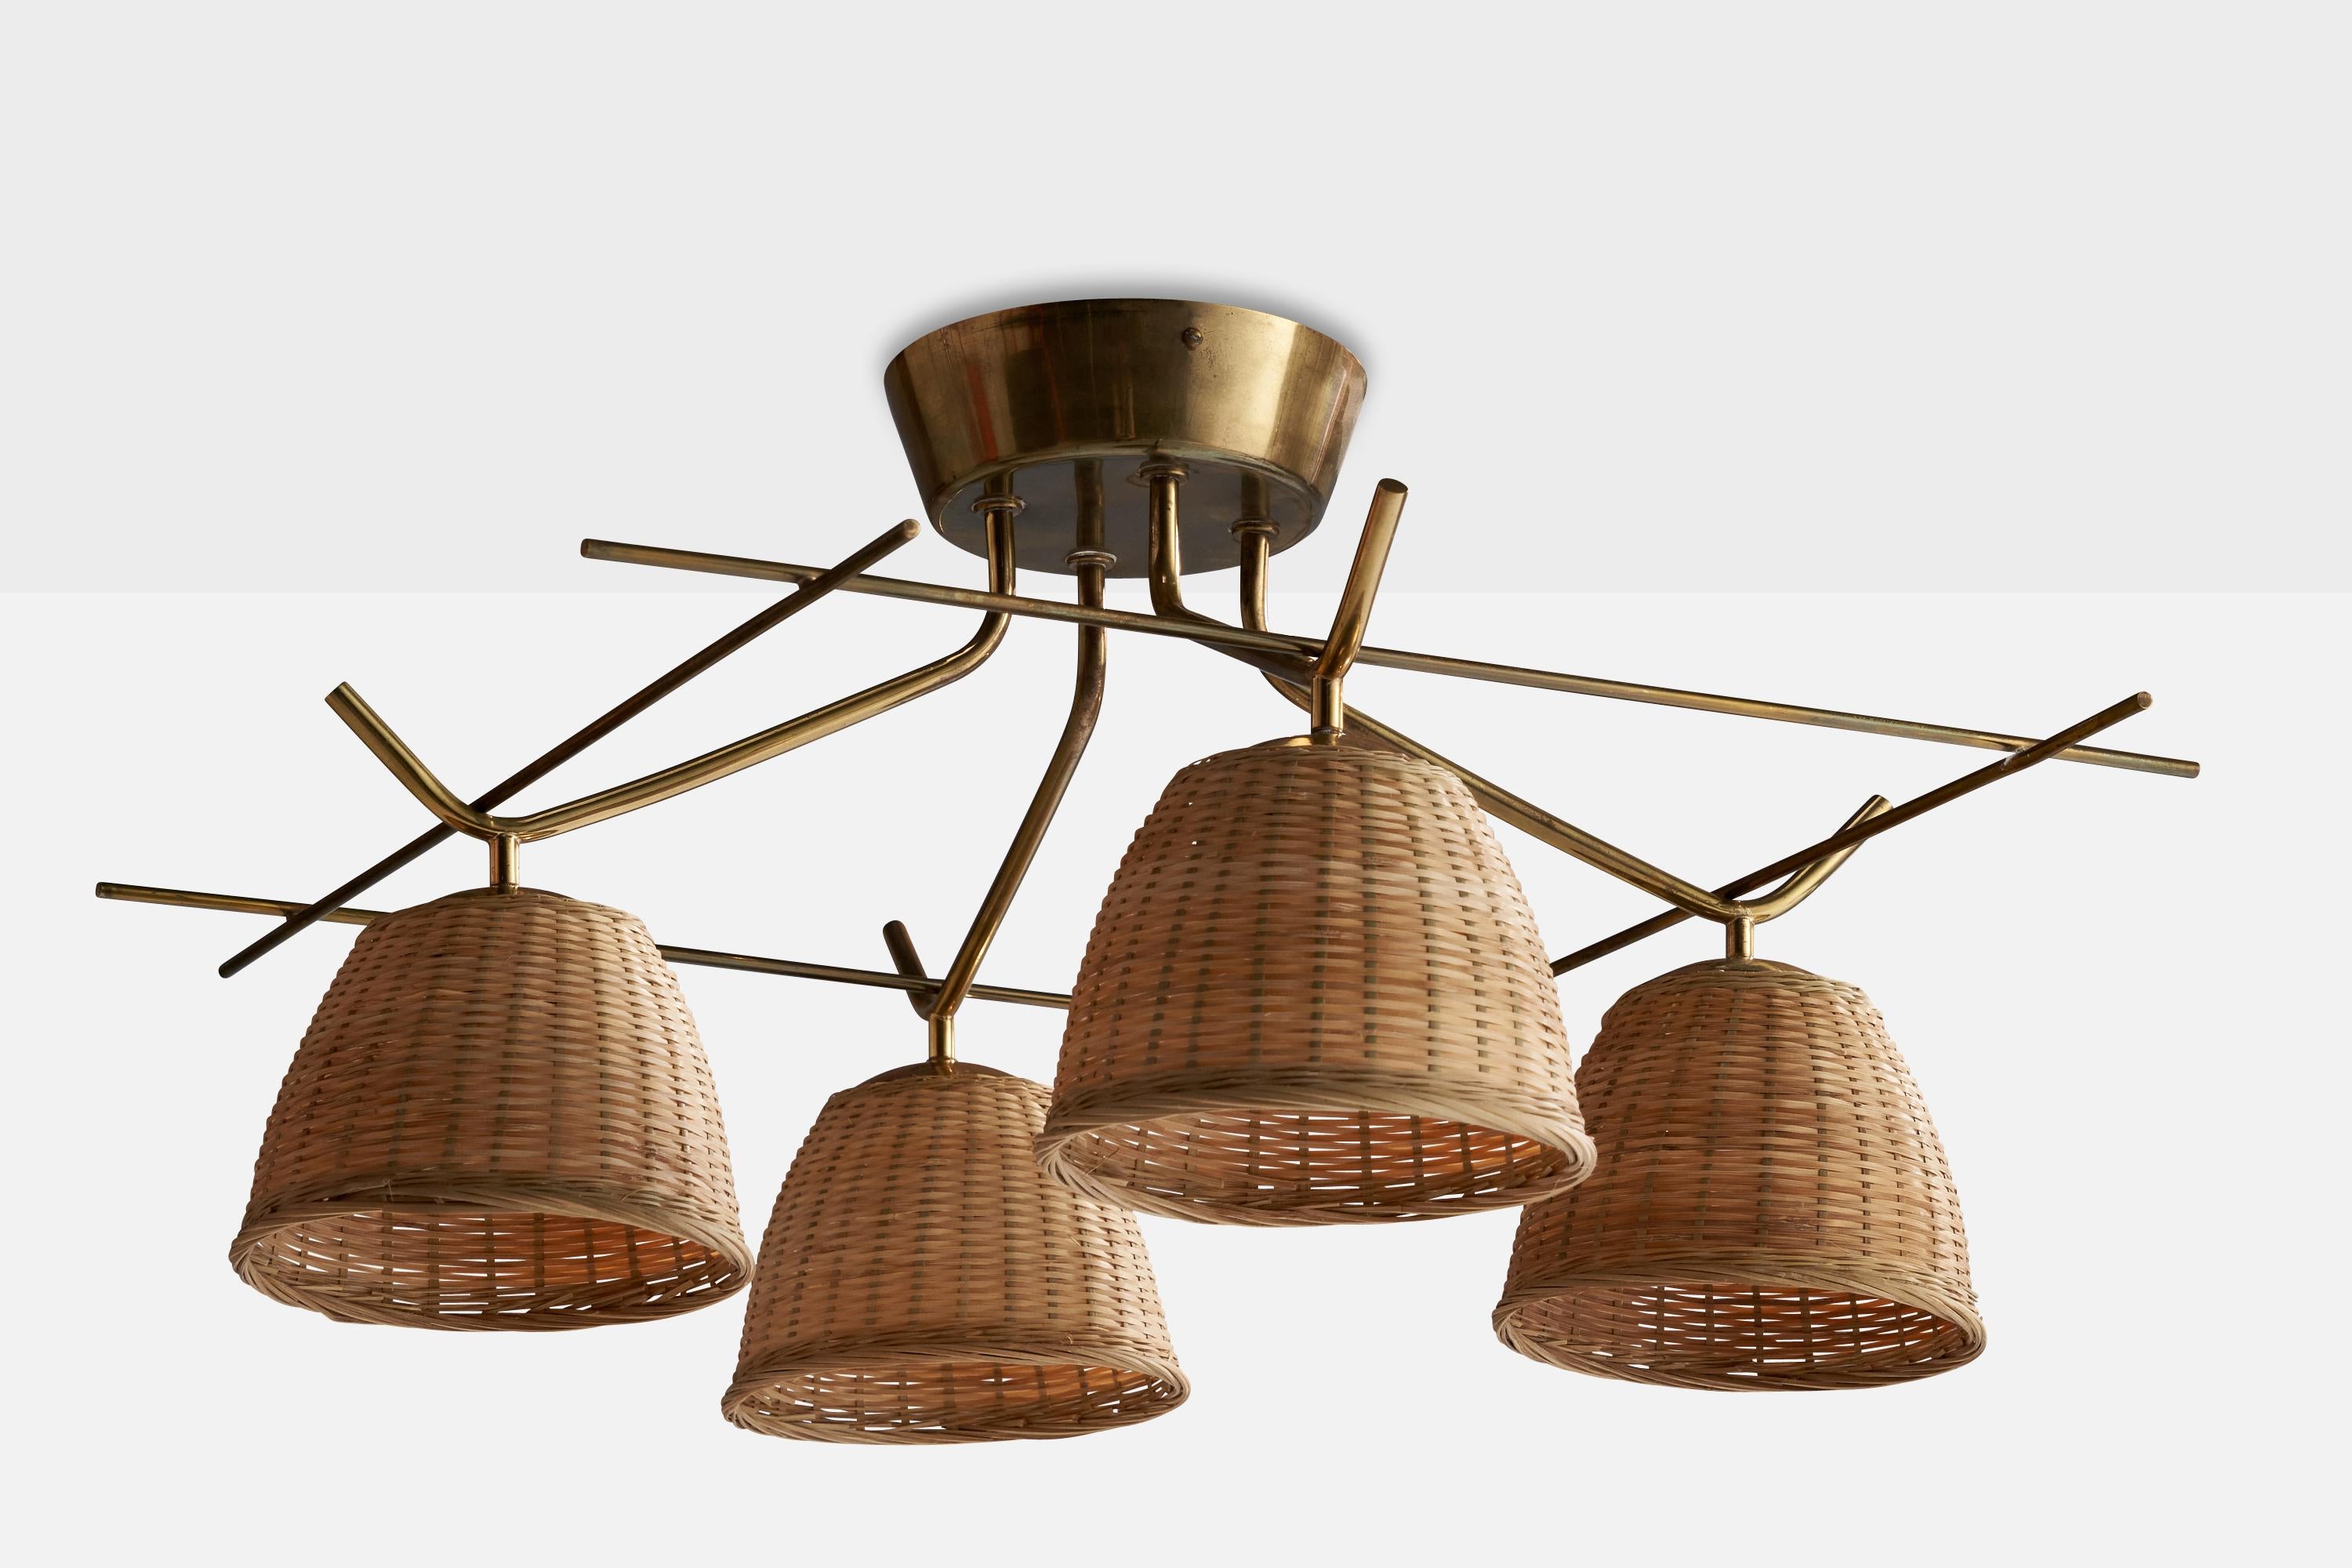 A brass and rattan chandelier designed and produced by Itsu, Finland, c. 1950s.

Dimensions of canopy (inches): 2.1” H x 6.65” Diameter
Socket takes standard E-26 bulbs. 4 sockets.There is no maximum wattage stated on the fixture. All lighting will